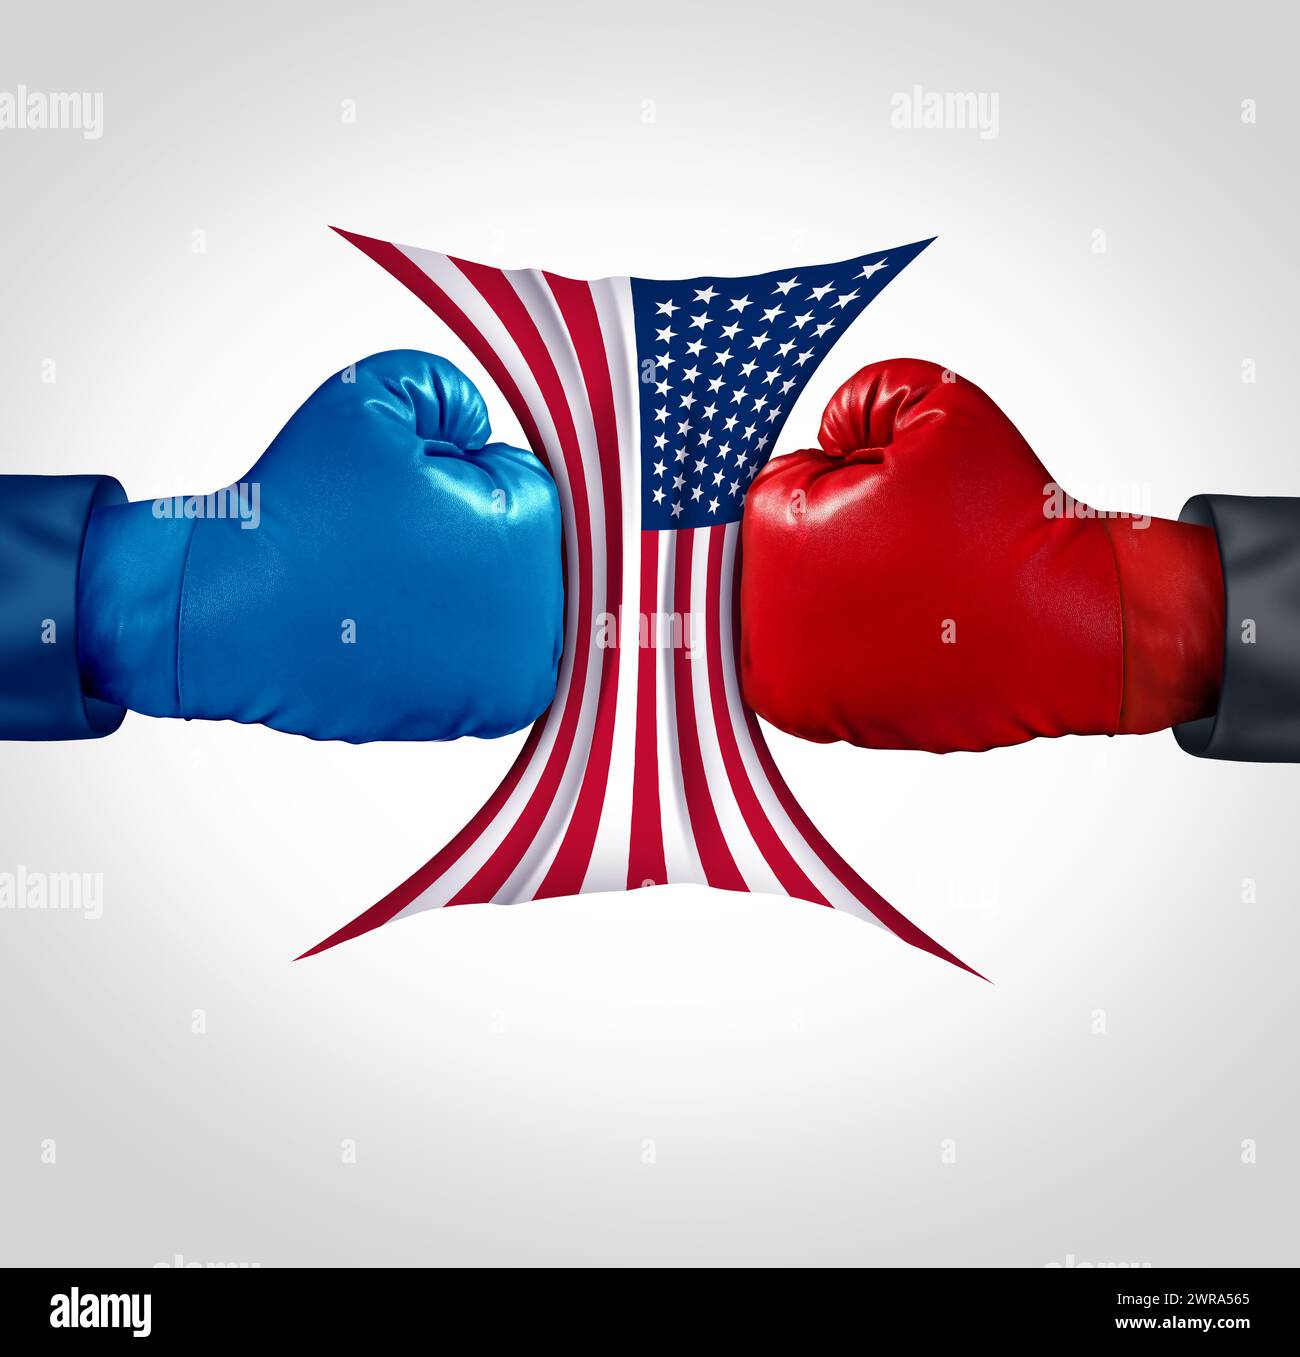 US Election Campaign and Left wing or right vote fighters as united states elections or American voting concept with conservative and liberal politici Stock Photo